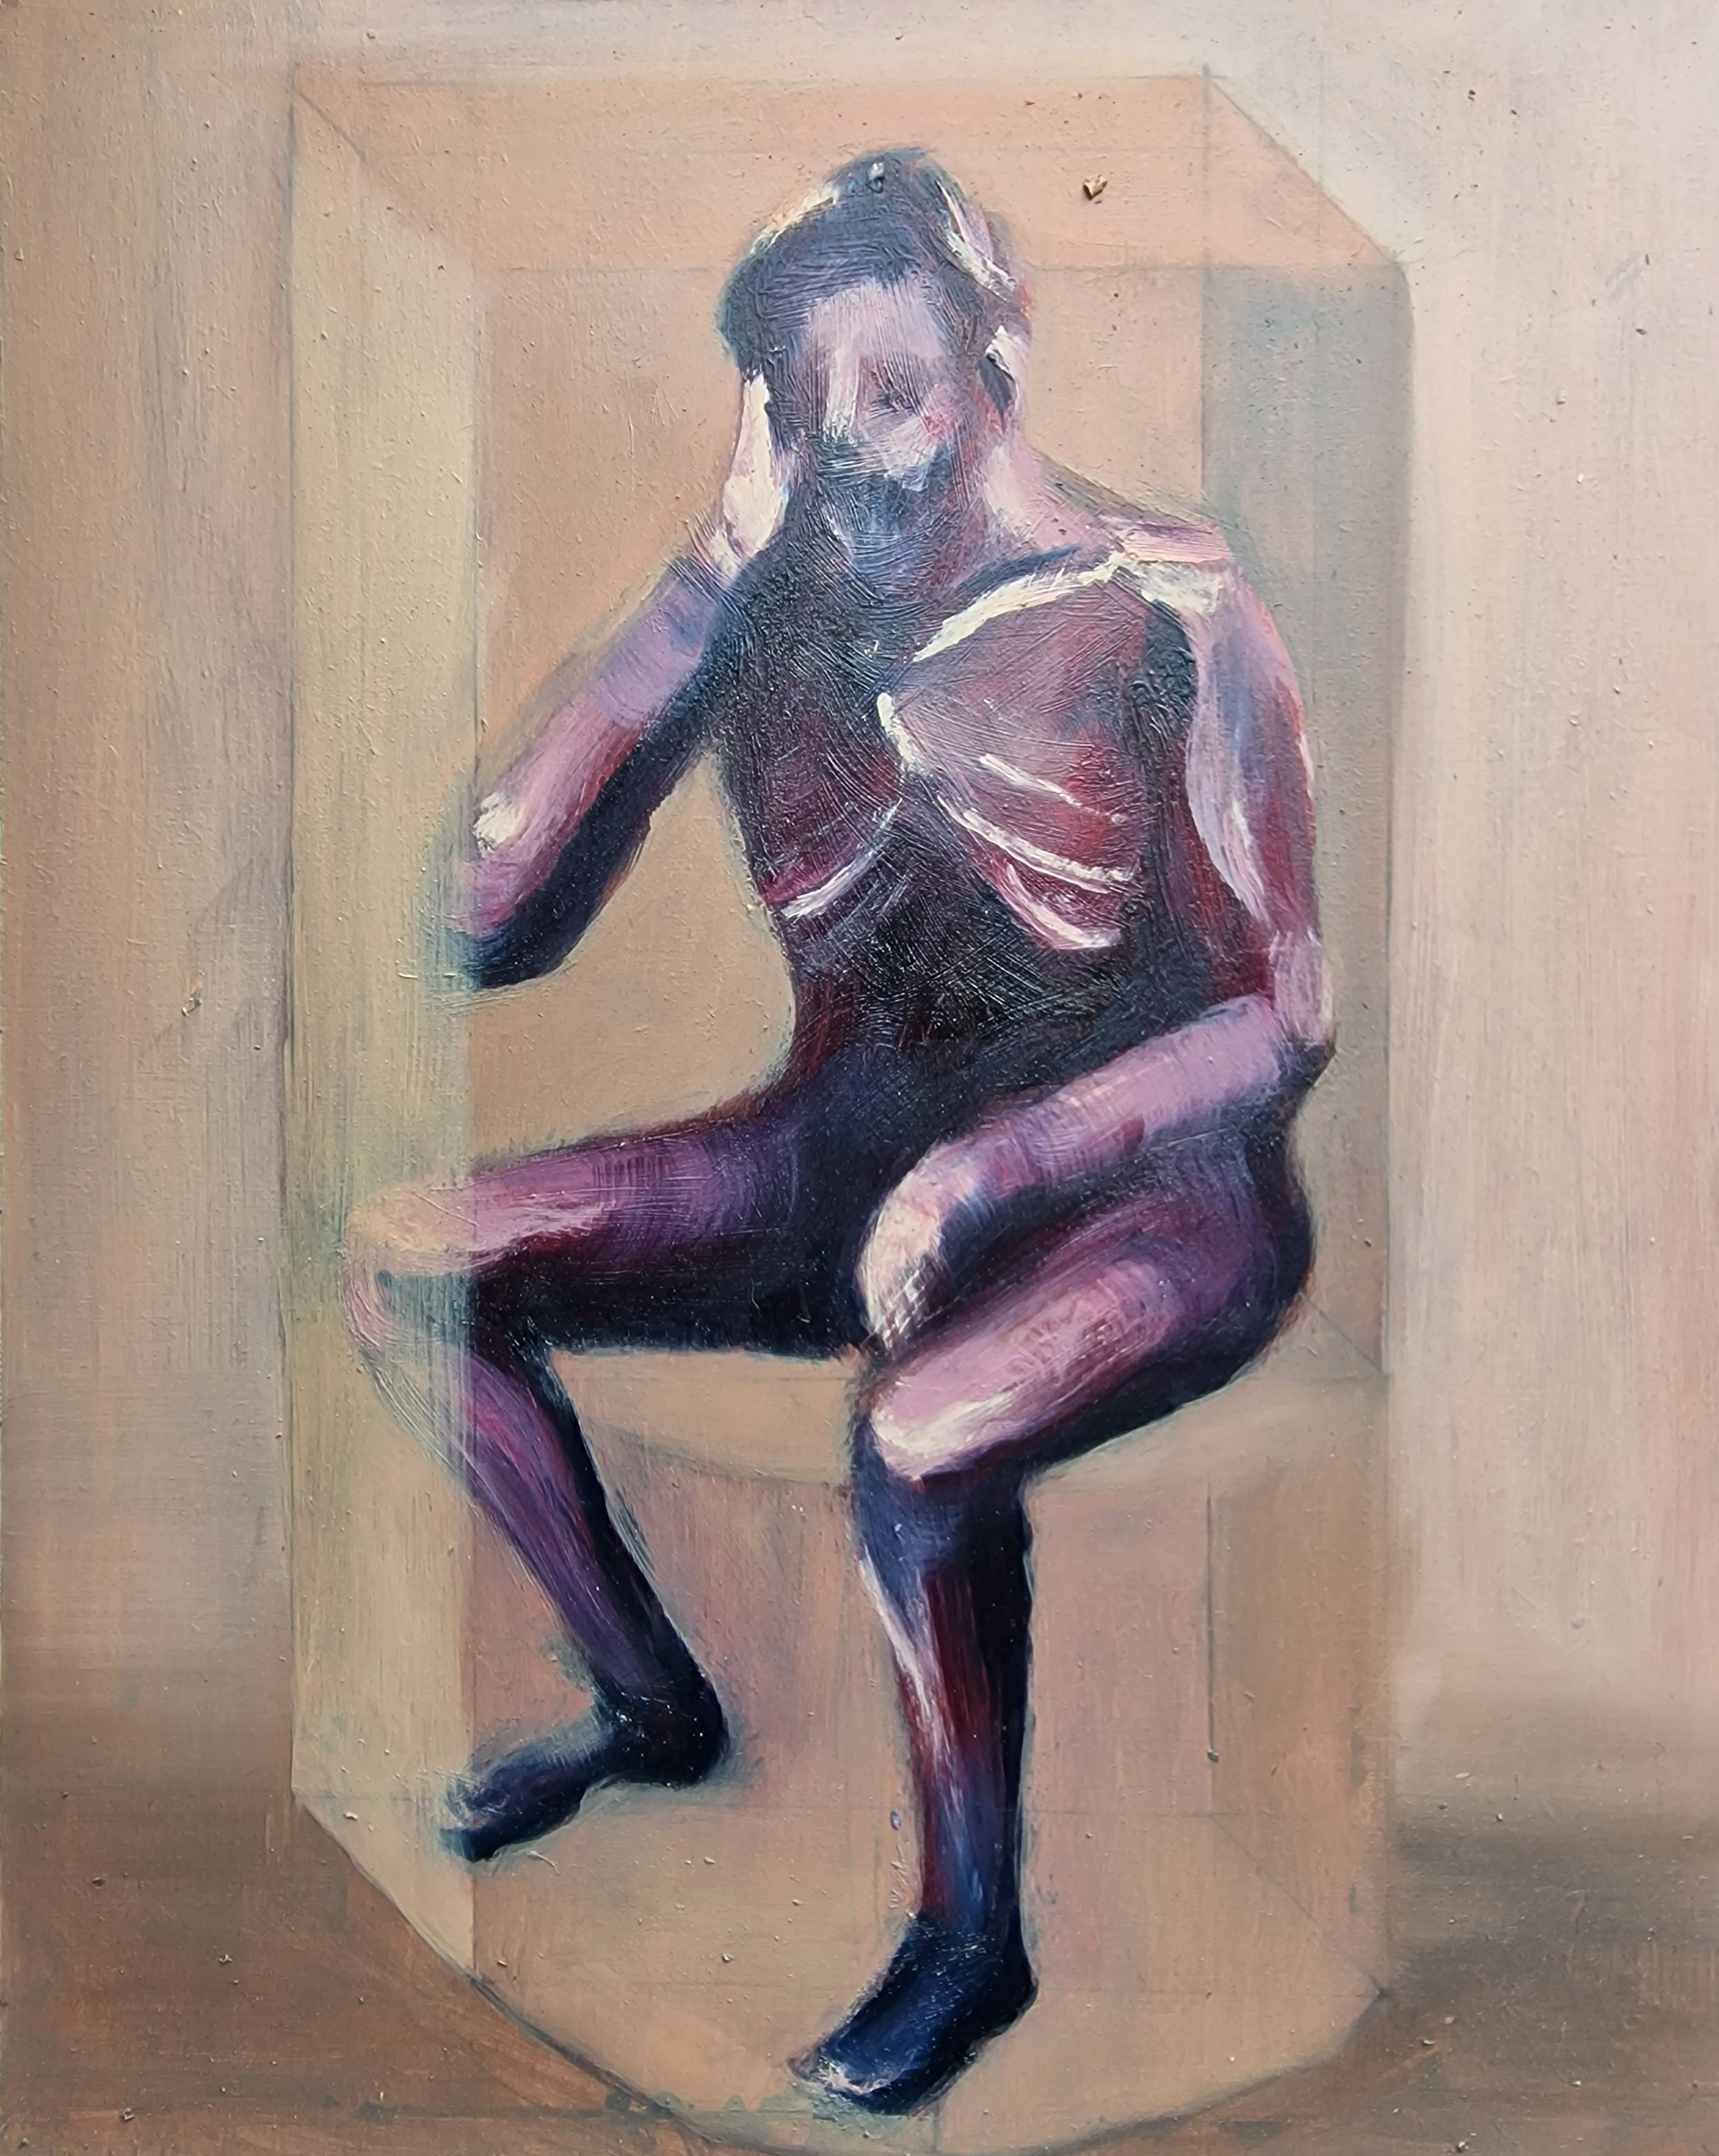 An oil painting by Elena Genovese shows a figure sitting in a flat liminal space.